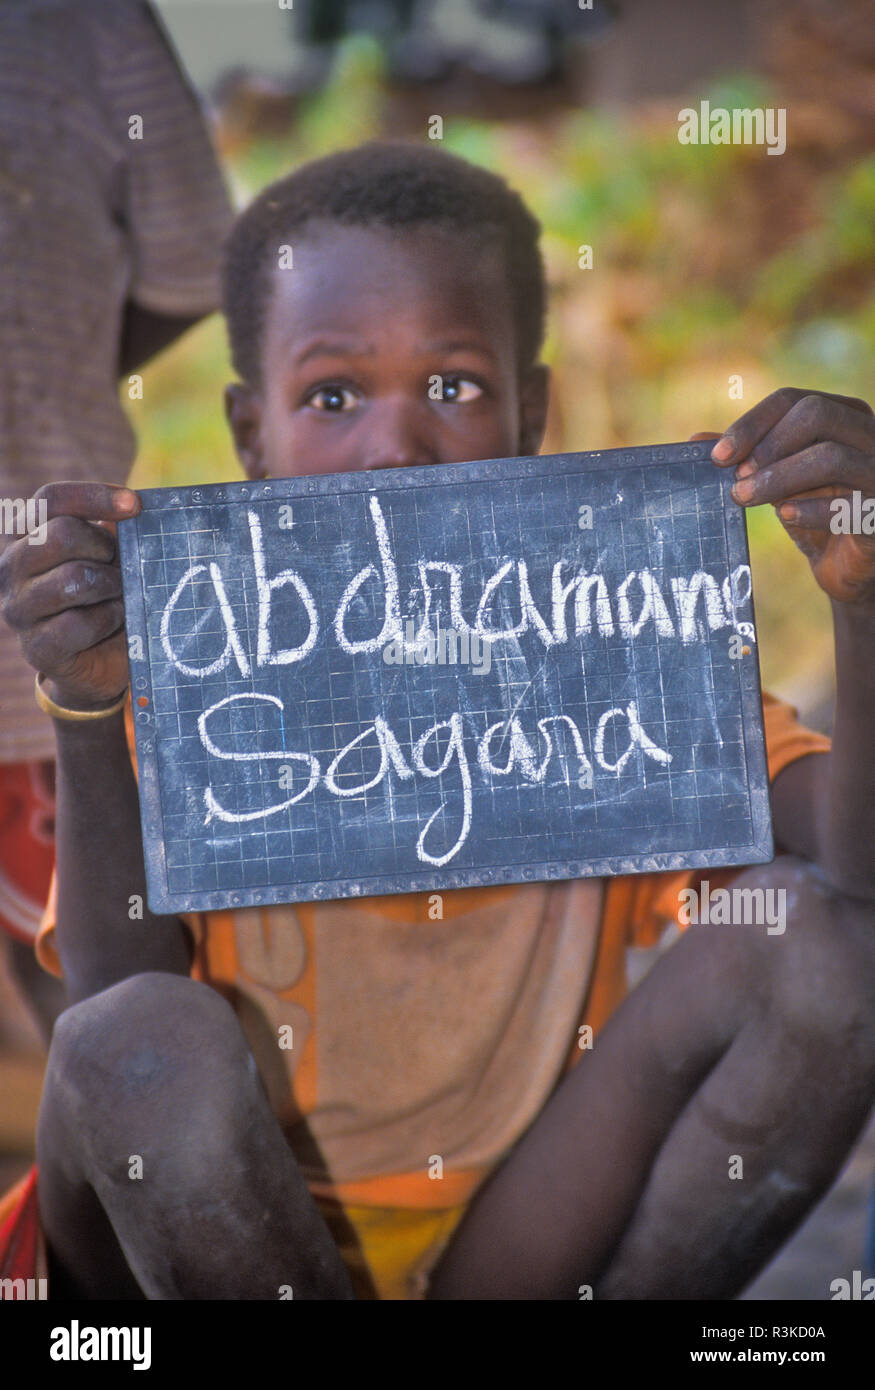 Africa, Mail, Dogon country. Boy from the Dogon tribe holds a tablet where he wrote his name on a chalkboard. Stock Photo